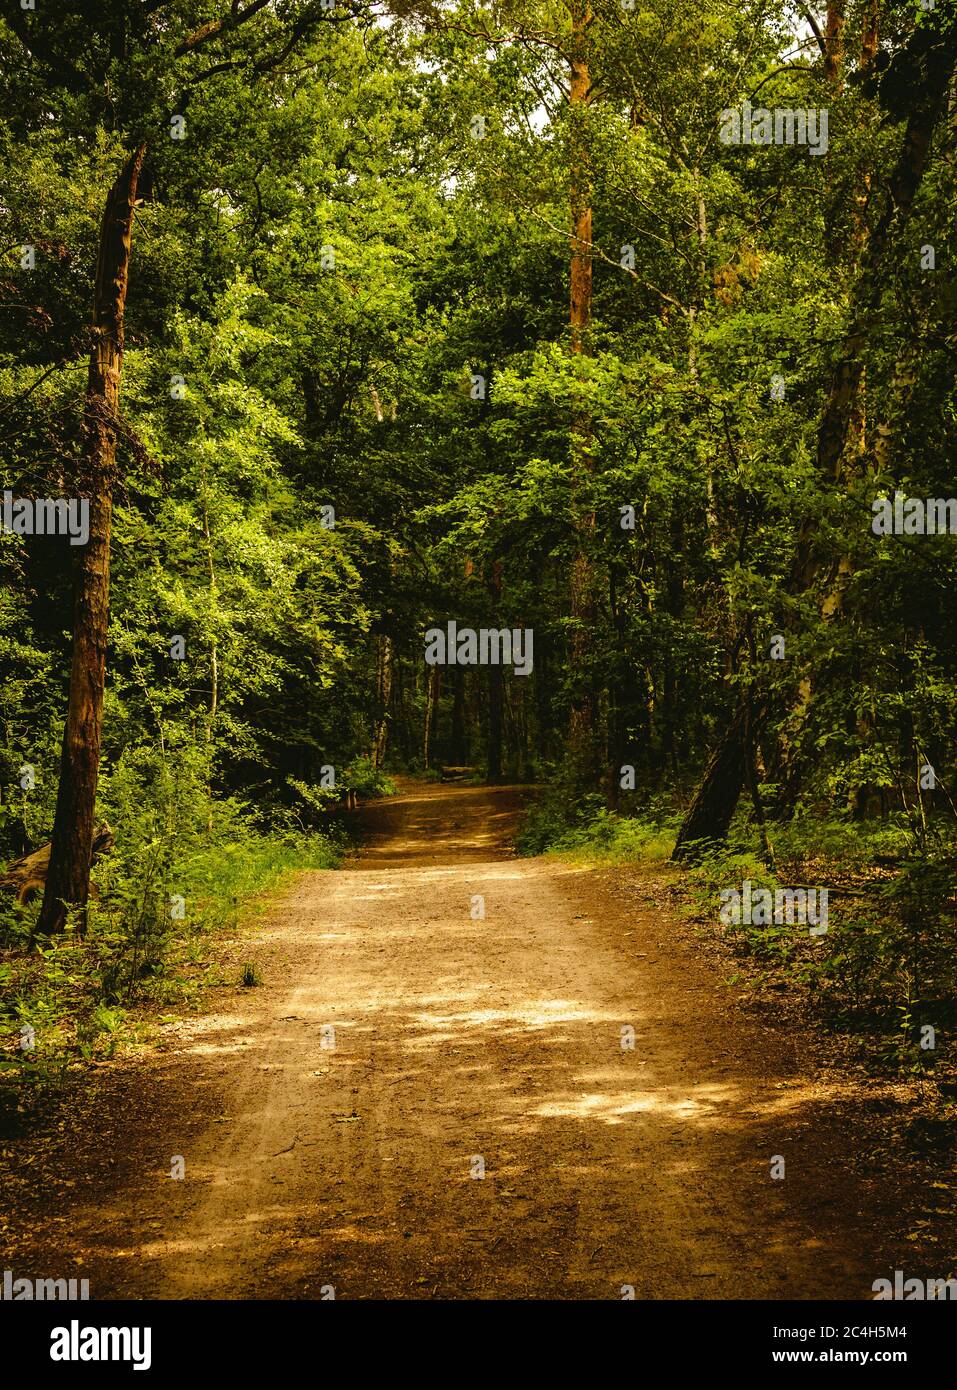 A forest path, flanked on one side by a tree and on the other by a